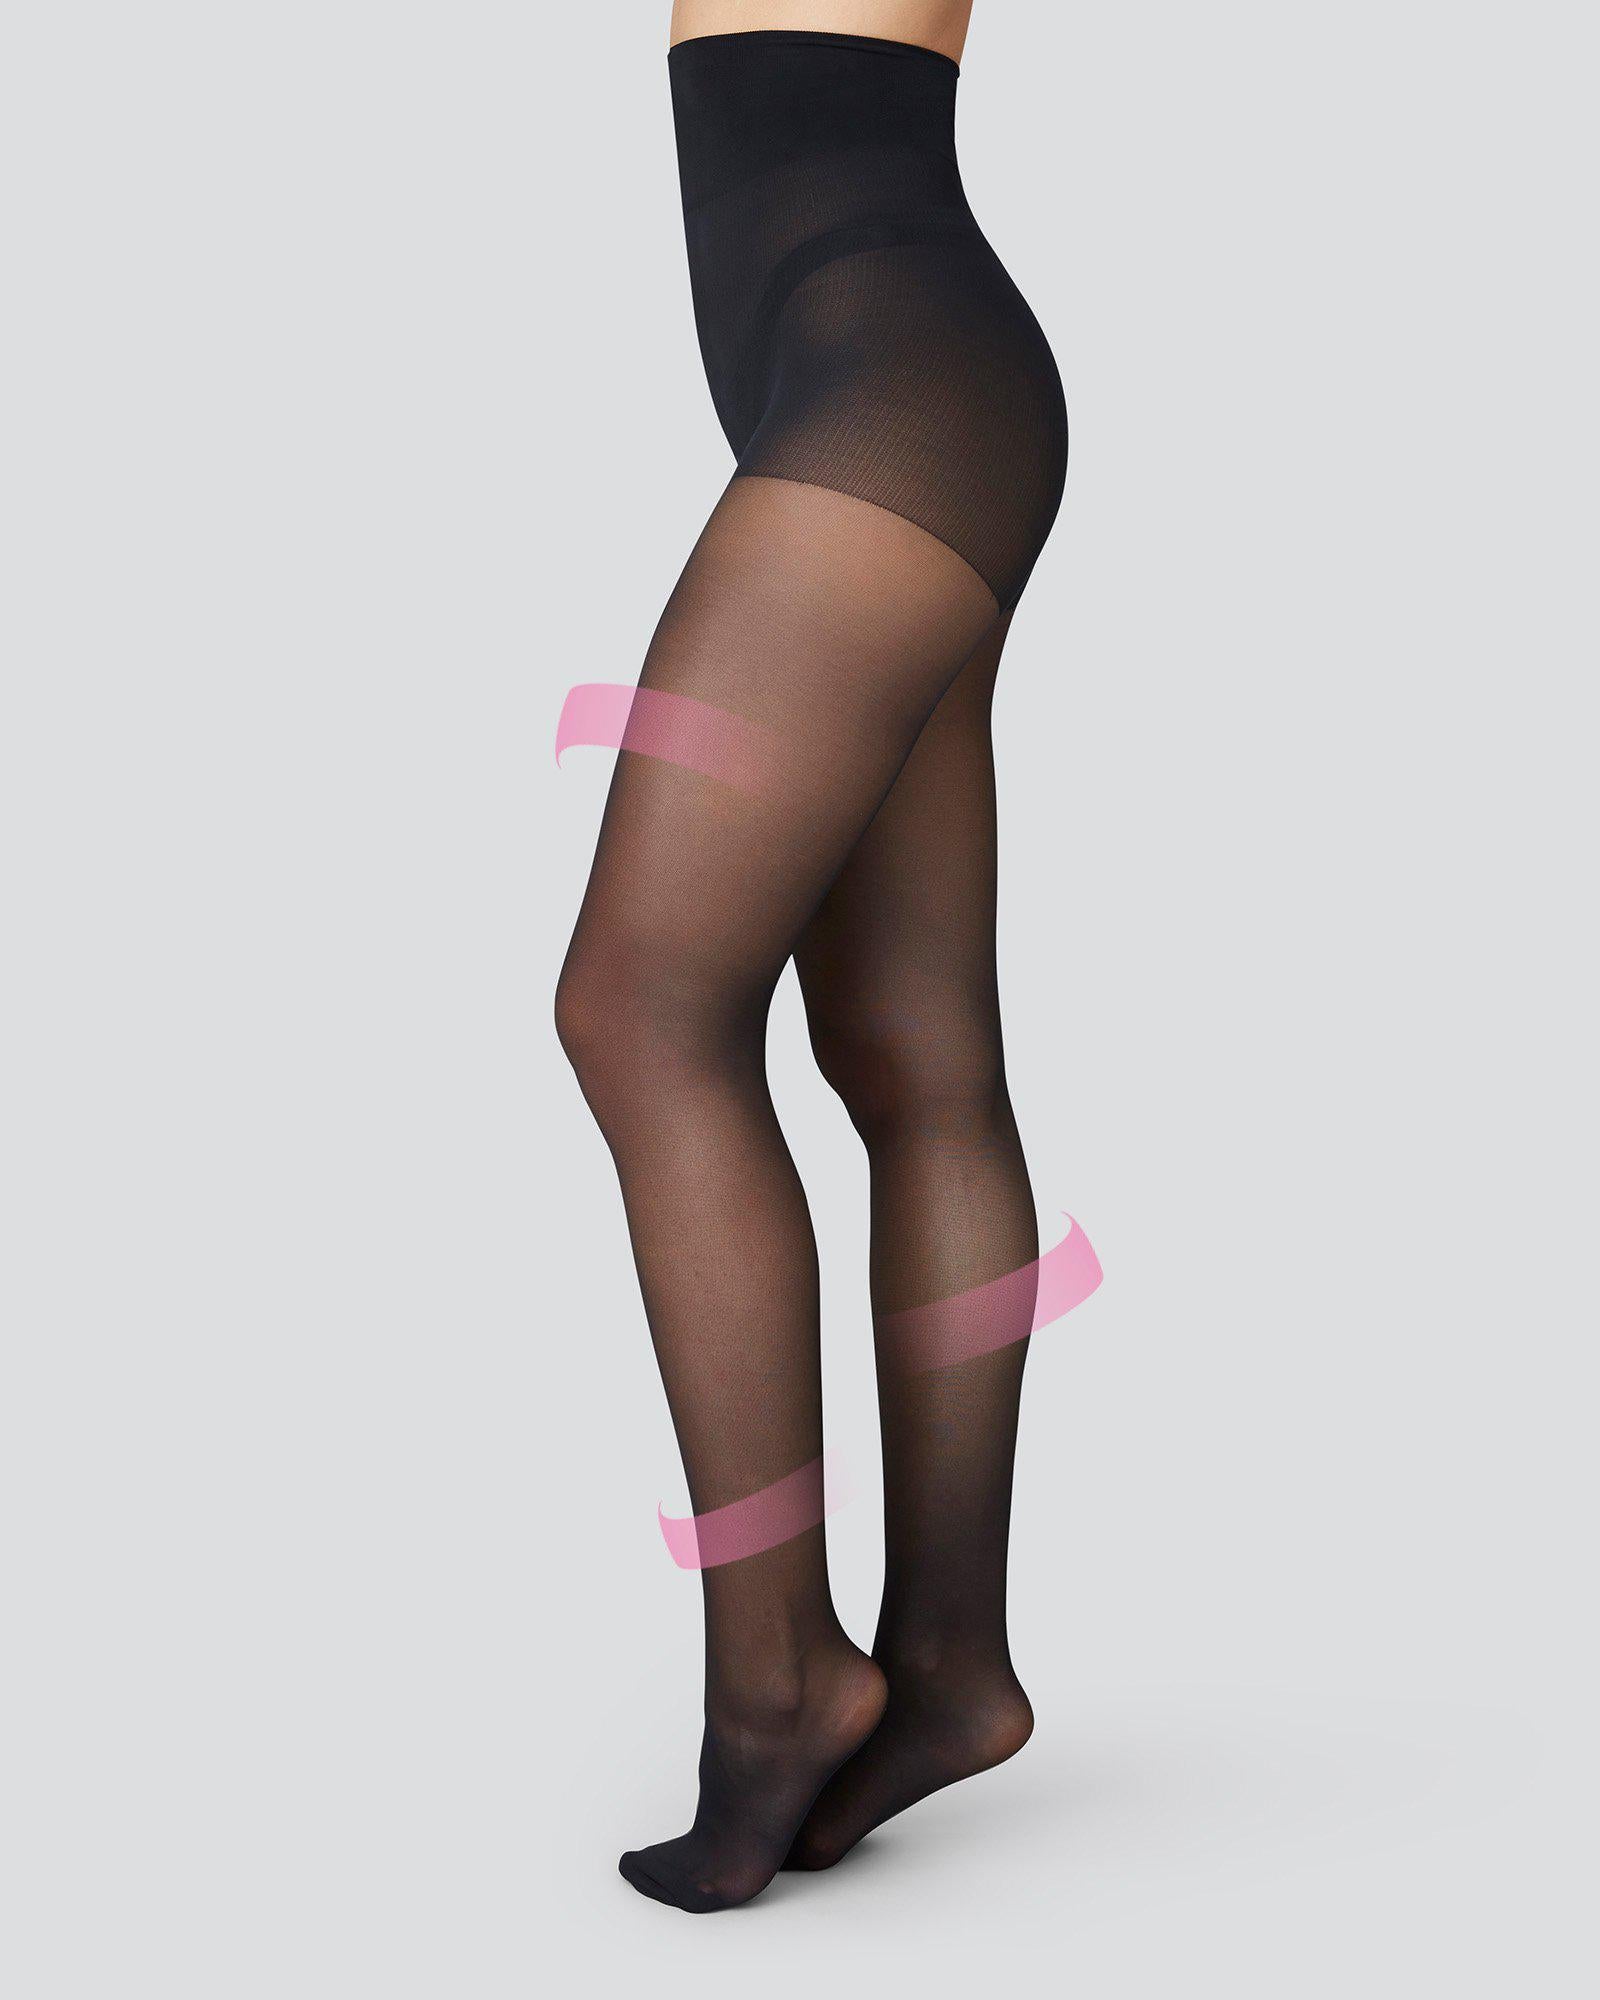 Irma Support Tights Black 30 den | Shop now - Swedish Stockings